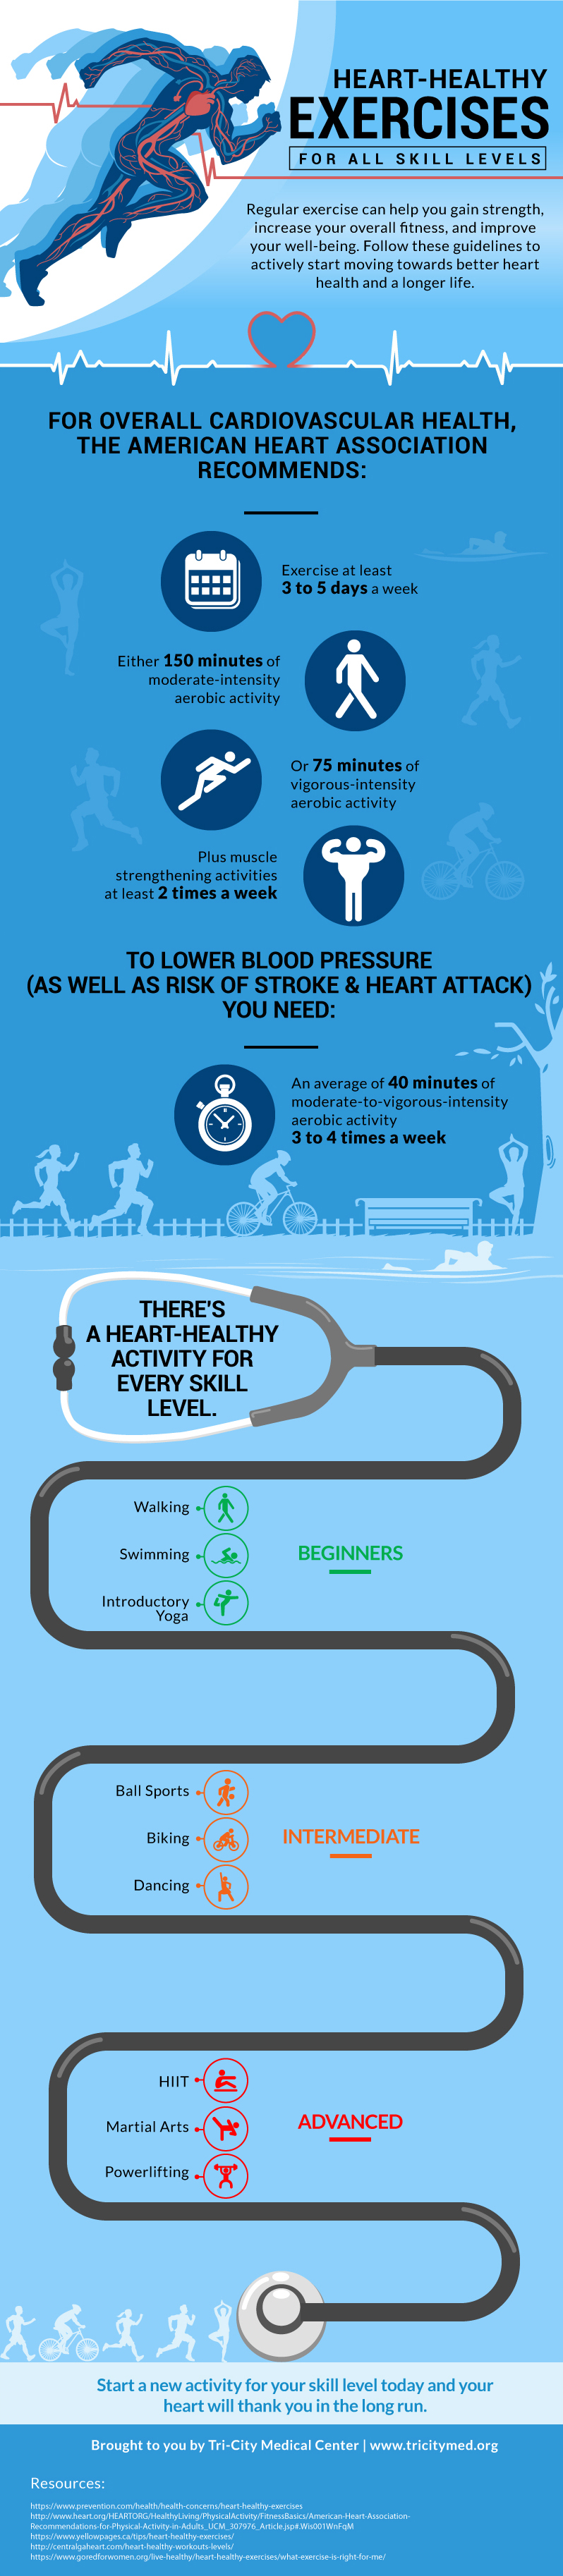 Infographic displaying heart-healthy workouts for each skill level